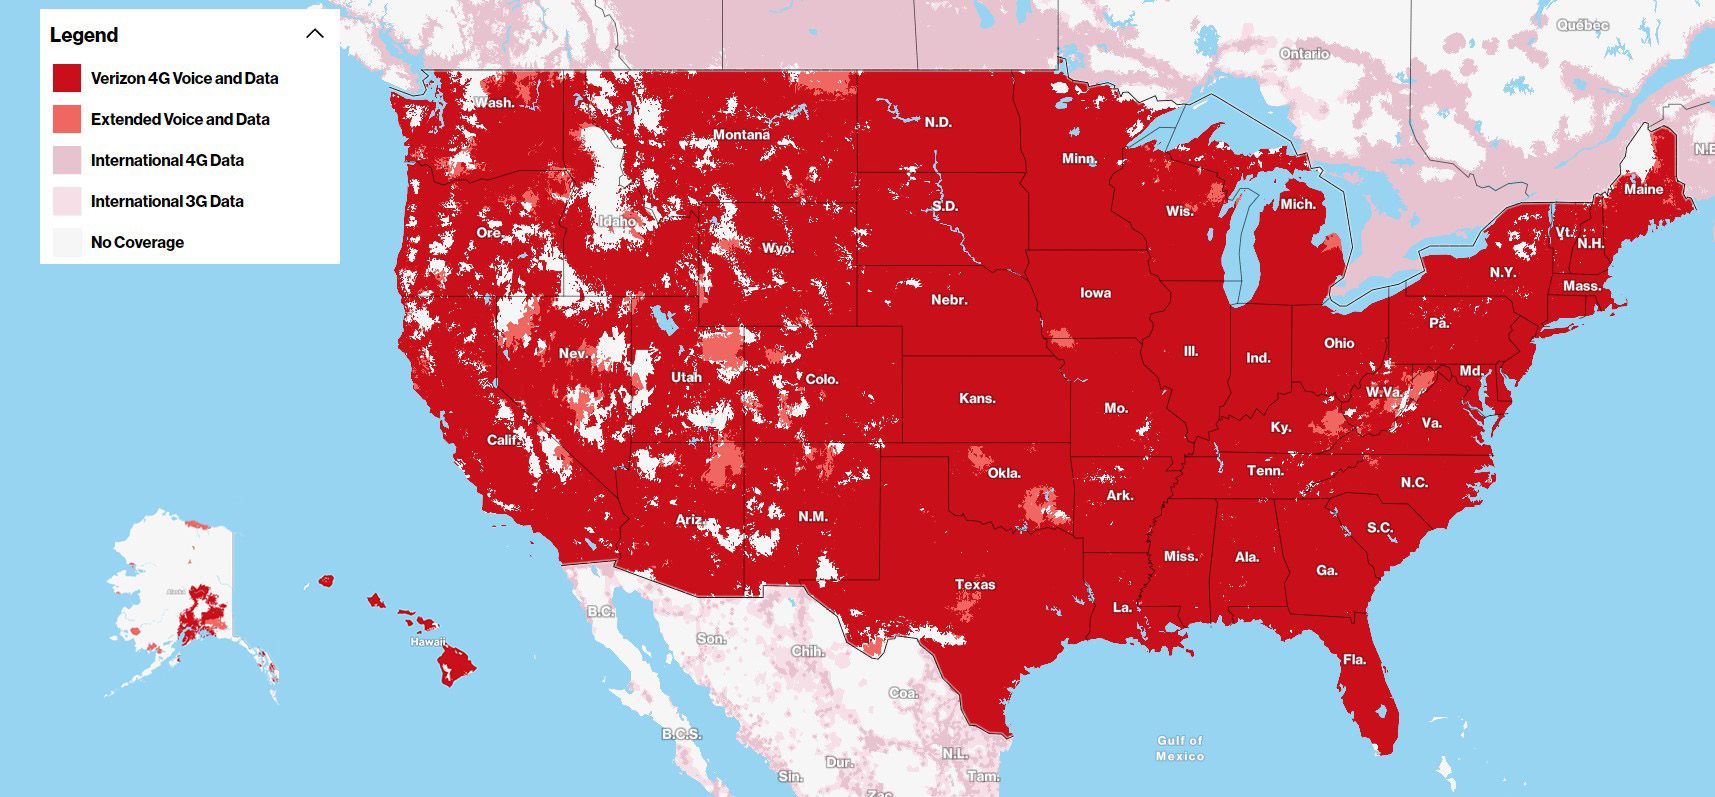 A coverage map of the United States showing Verizon's network with areas of 4G Voice and Data in red, Extended Voice and Data in lighter red, and International 4G Data in pink, along with zones of no coverage.